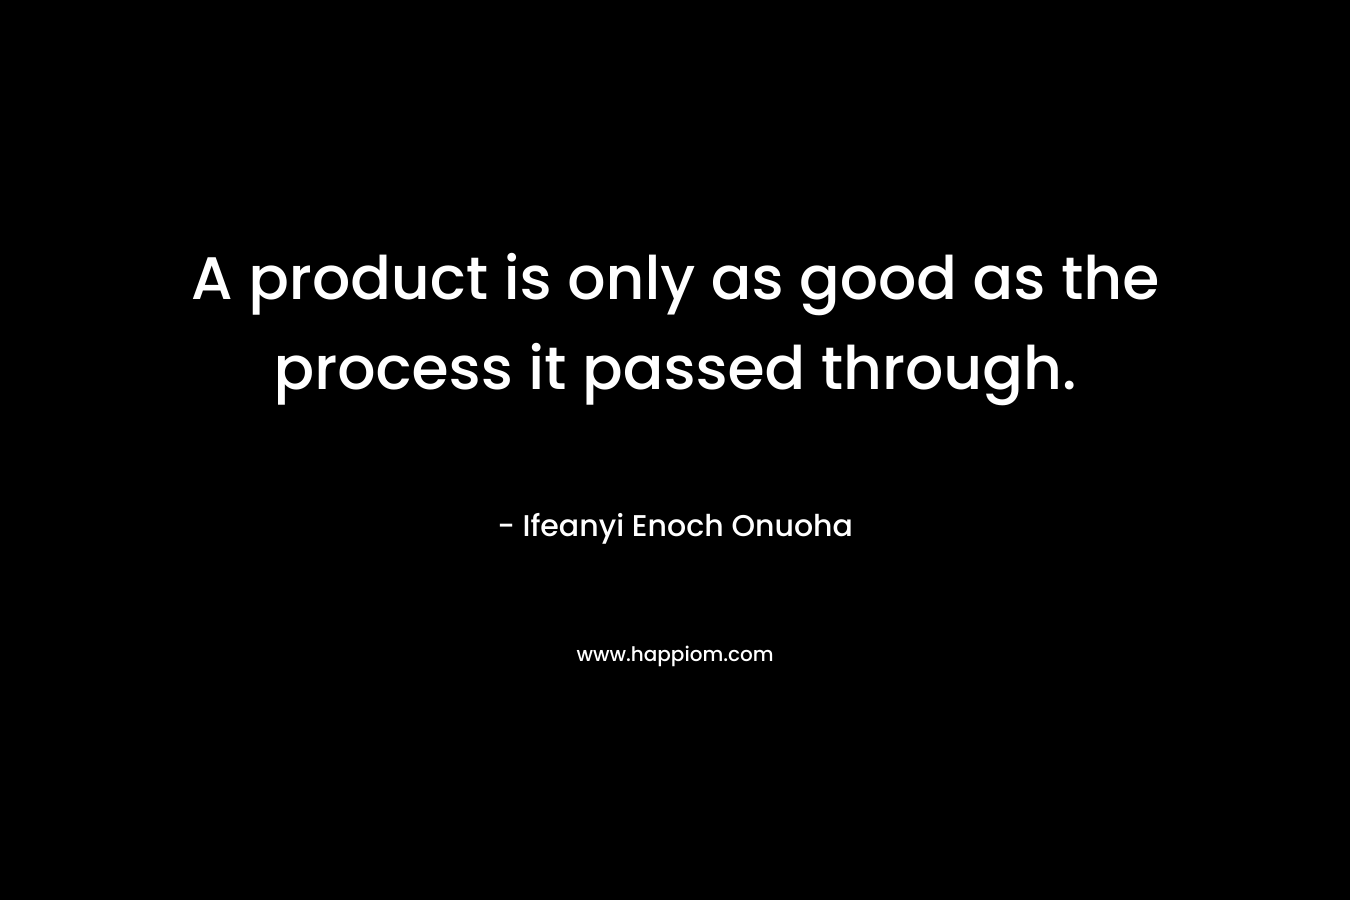 A product is only as good as the process it passed through.